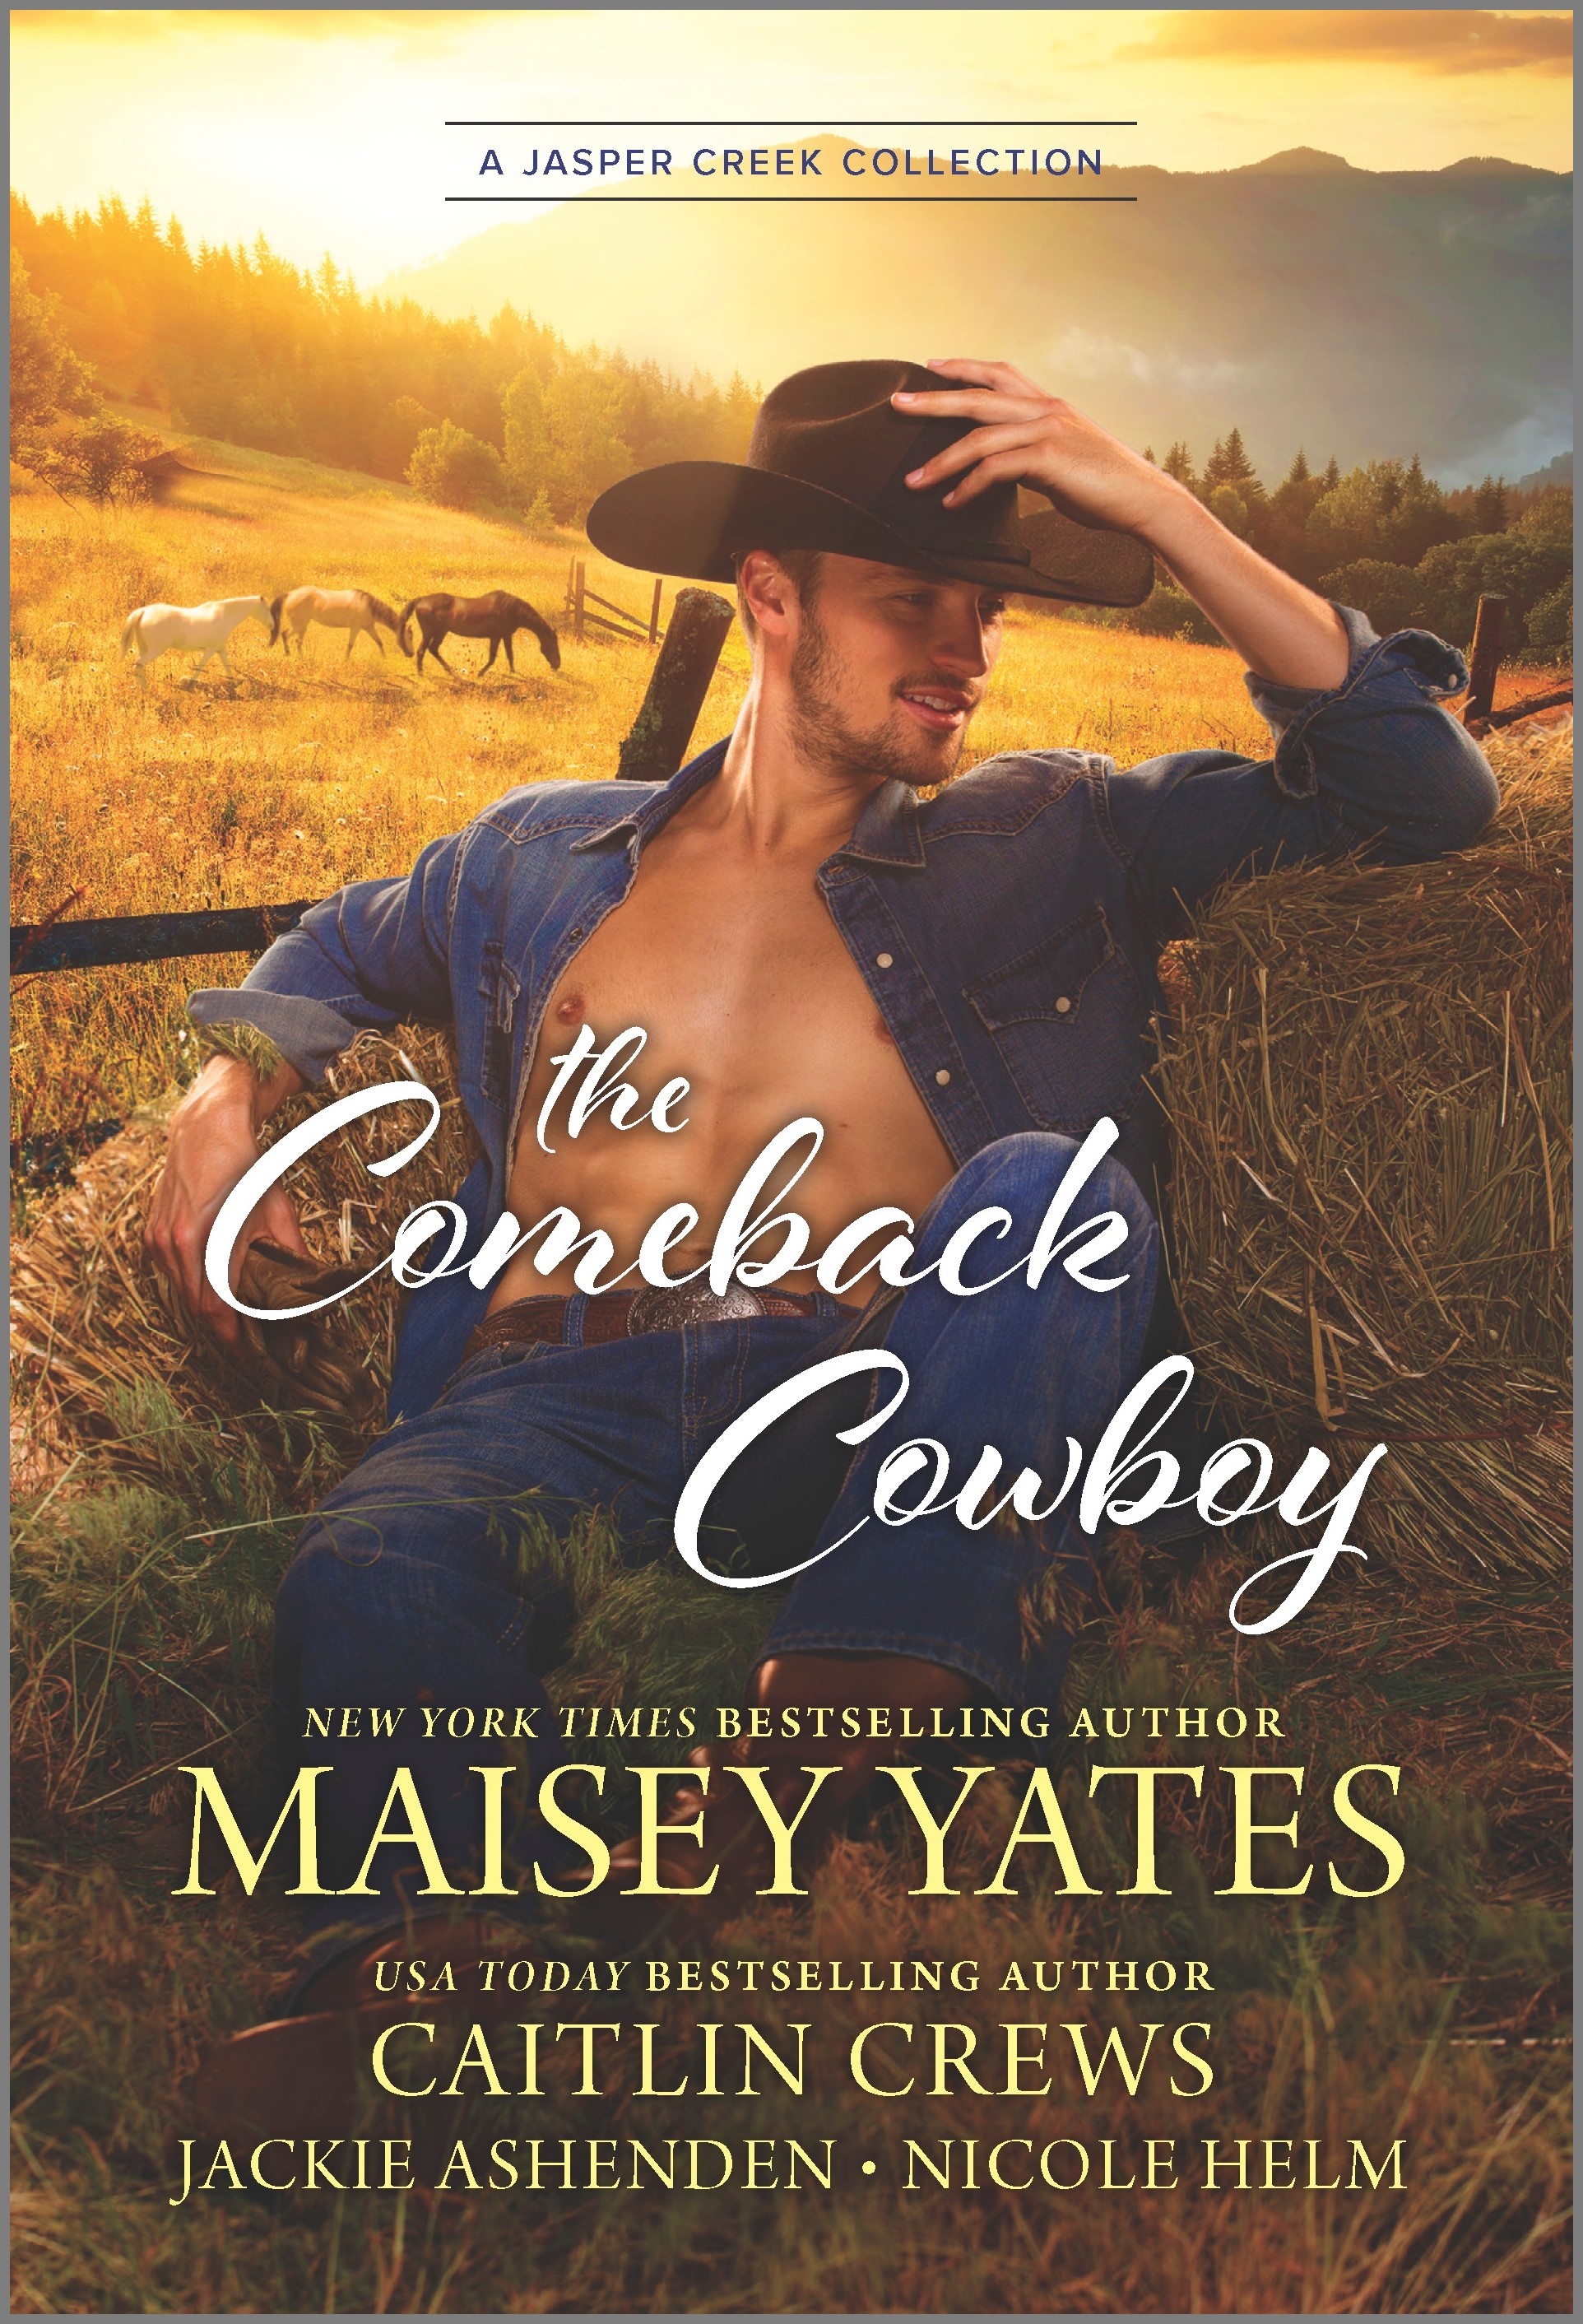 THE COMEBACK COWBOY by Maisey Yates, Caitlin Crews, Jackie Ashenden and Nicole Helm